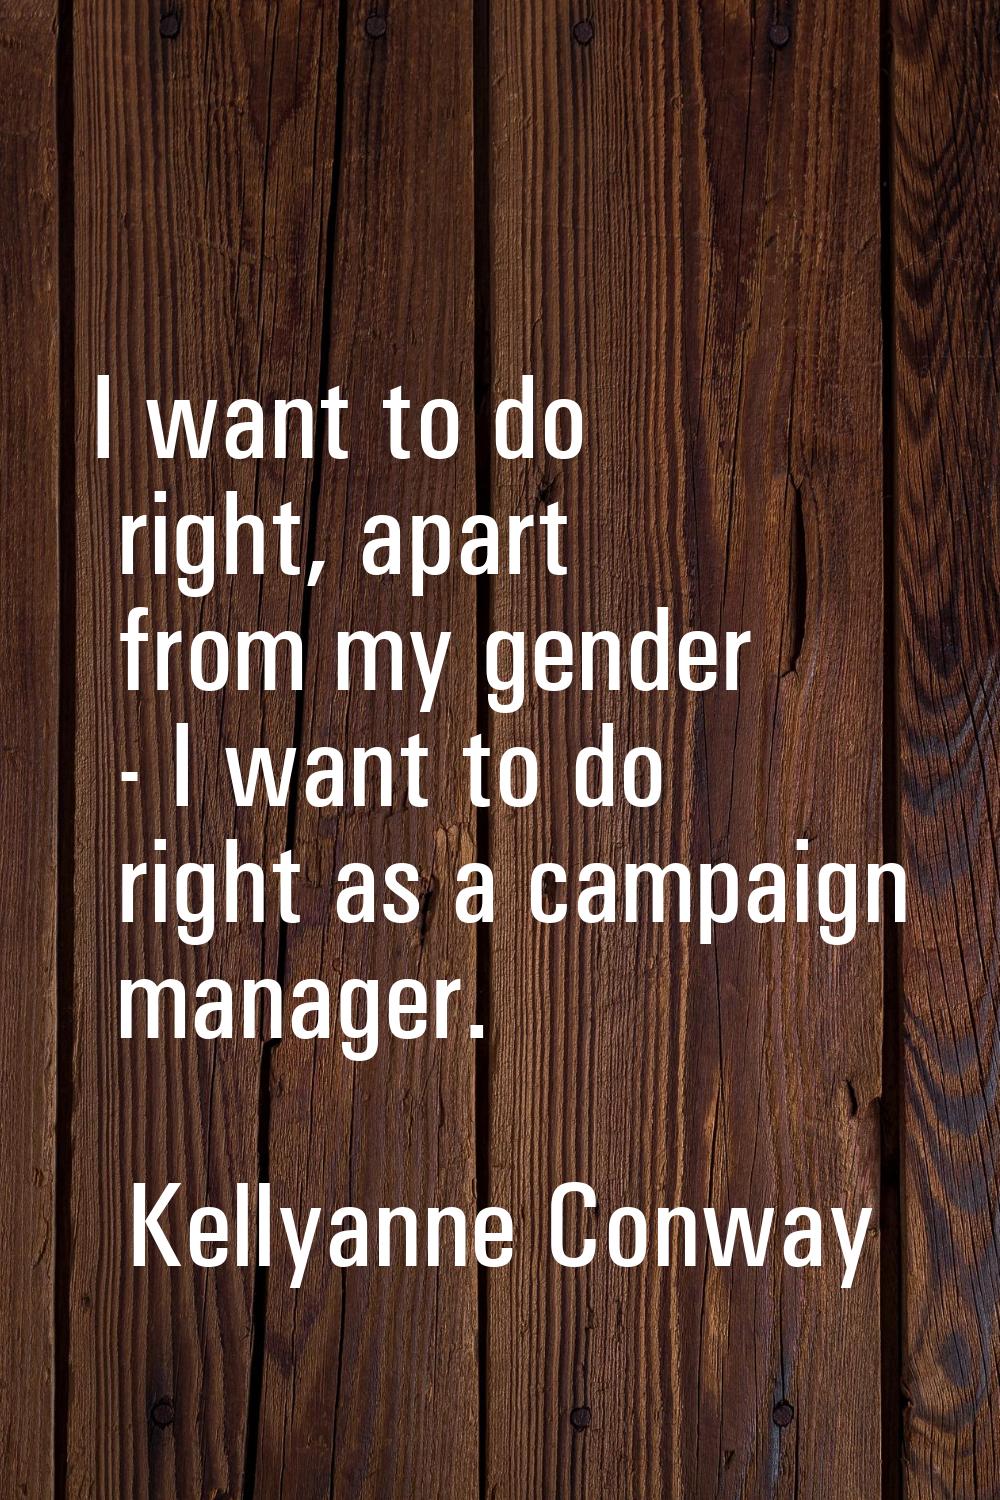 I want to do right, apart from my gender - I want to do right as a campaign manager.